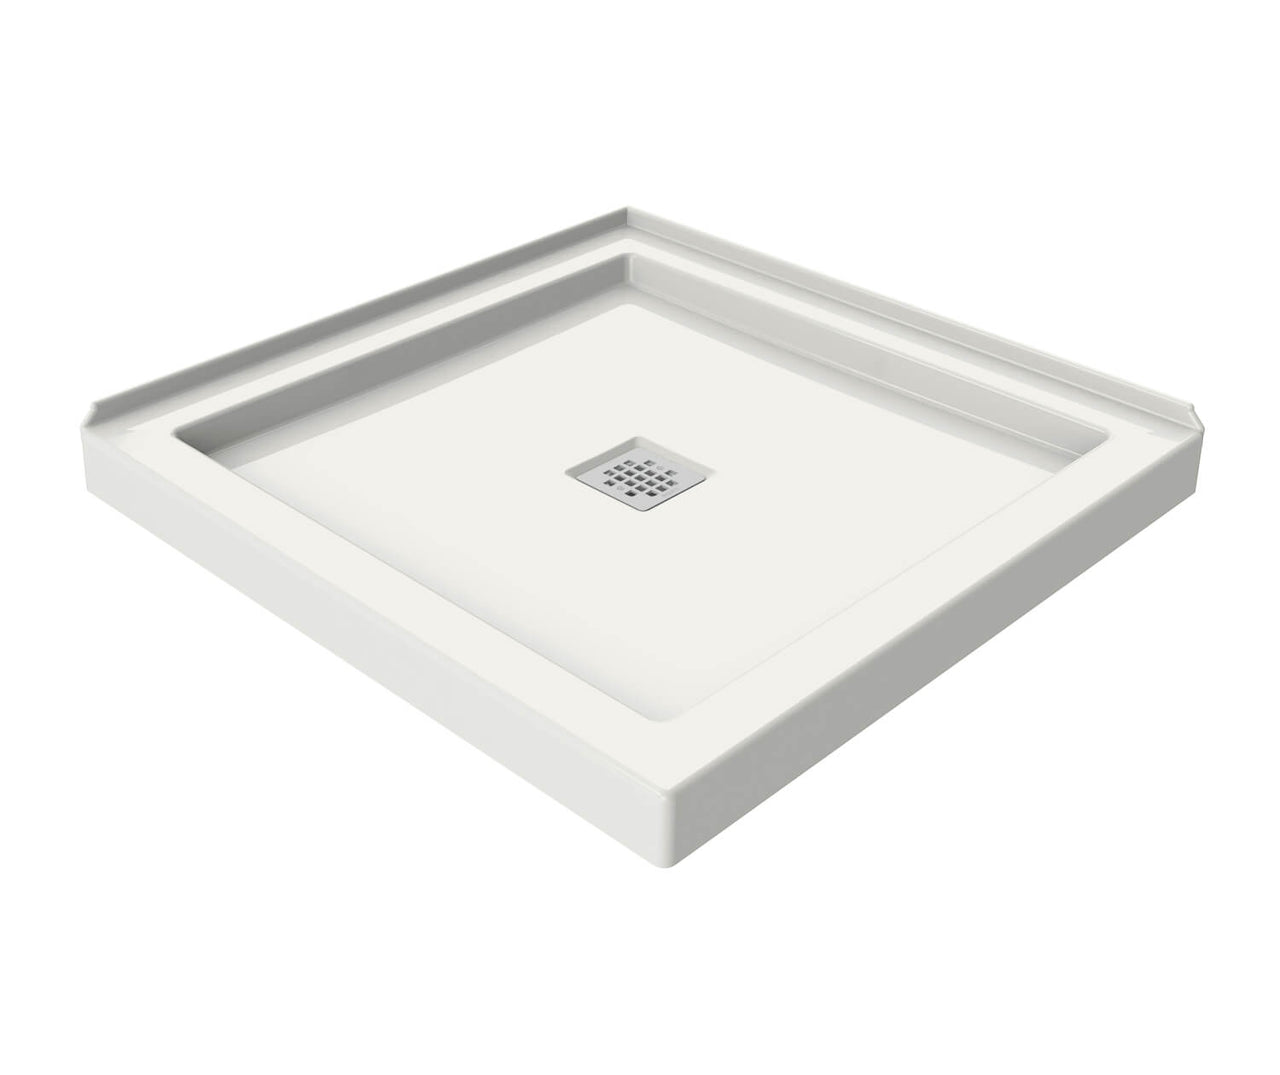 B3Square 3636 Acrylic Corner Left or Right – Stabili-T Shower Base - BNGBath